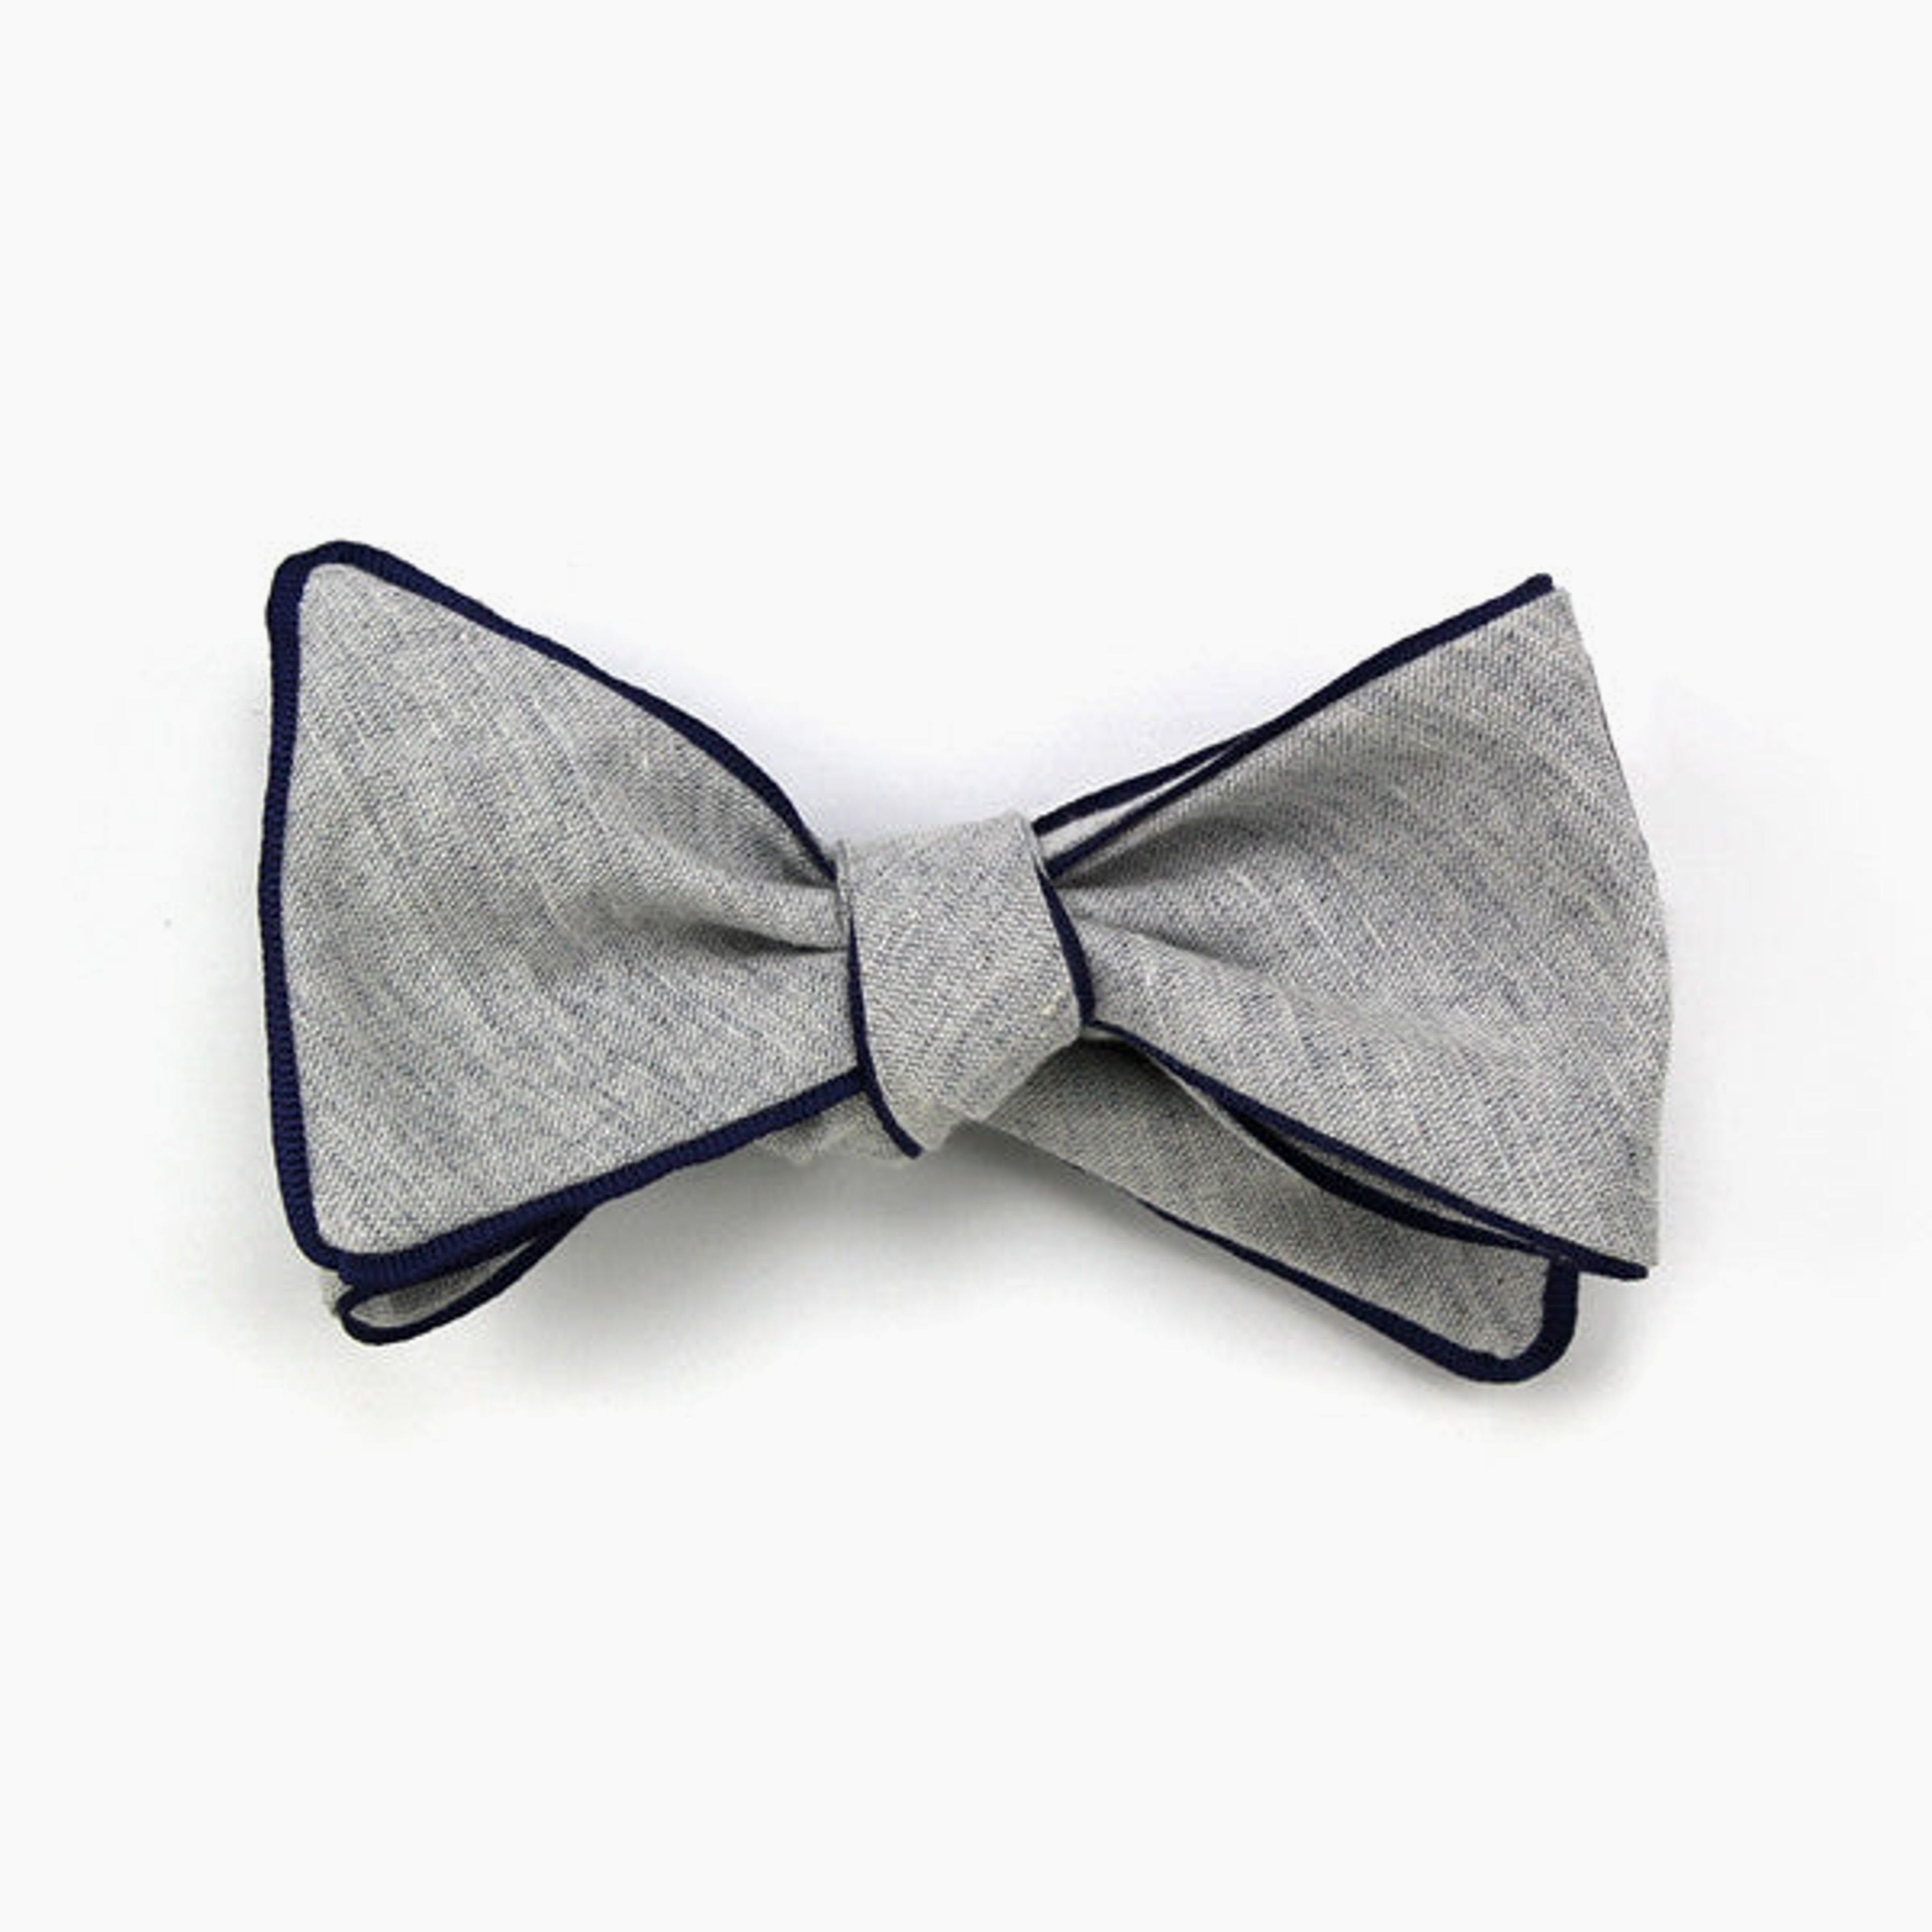 Navies: Gray Chambray Butterfly Bow-tie with Blue Trim